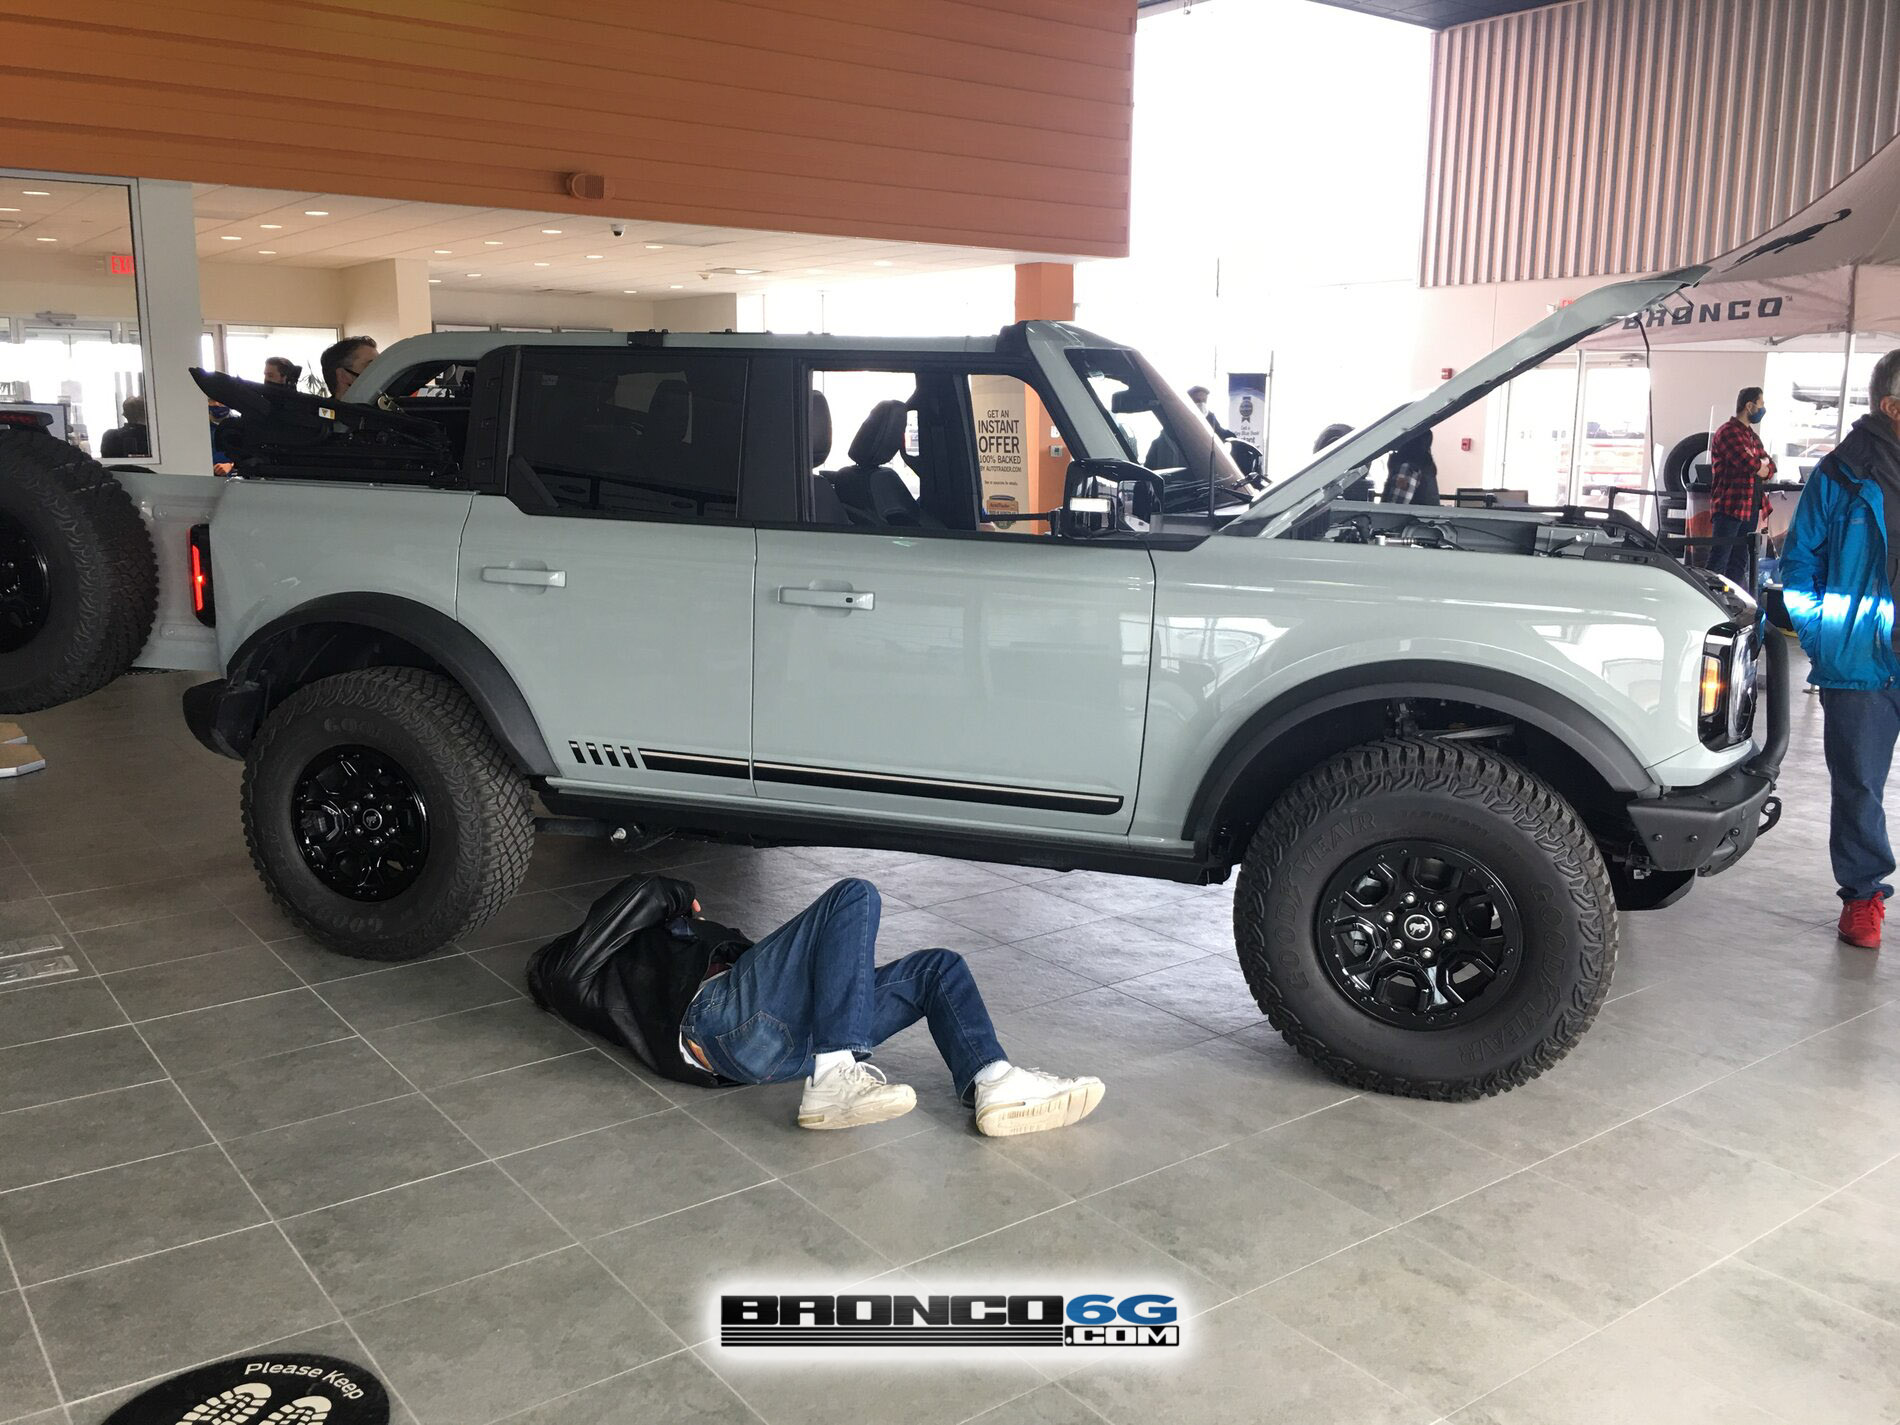 2021 Bronco FIRST EDITION Cactus Gray 4 Door Soft Top Preview Event 14.jpg